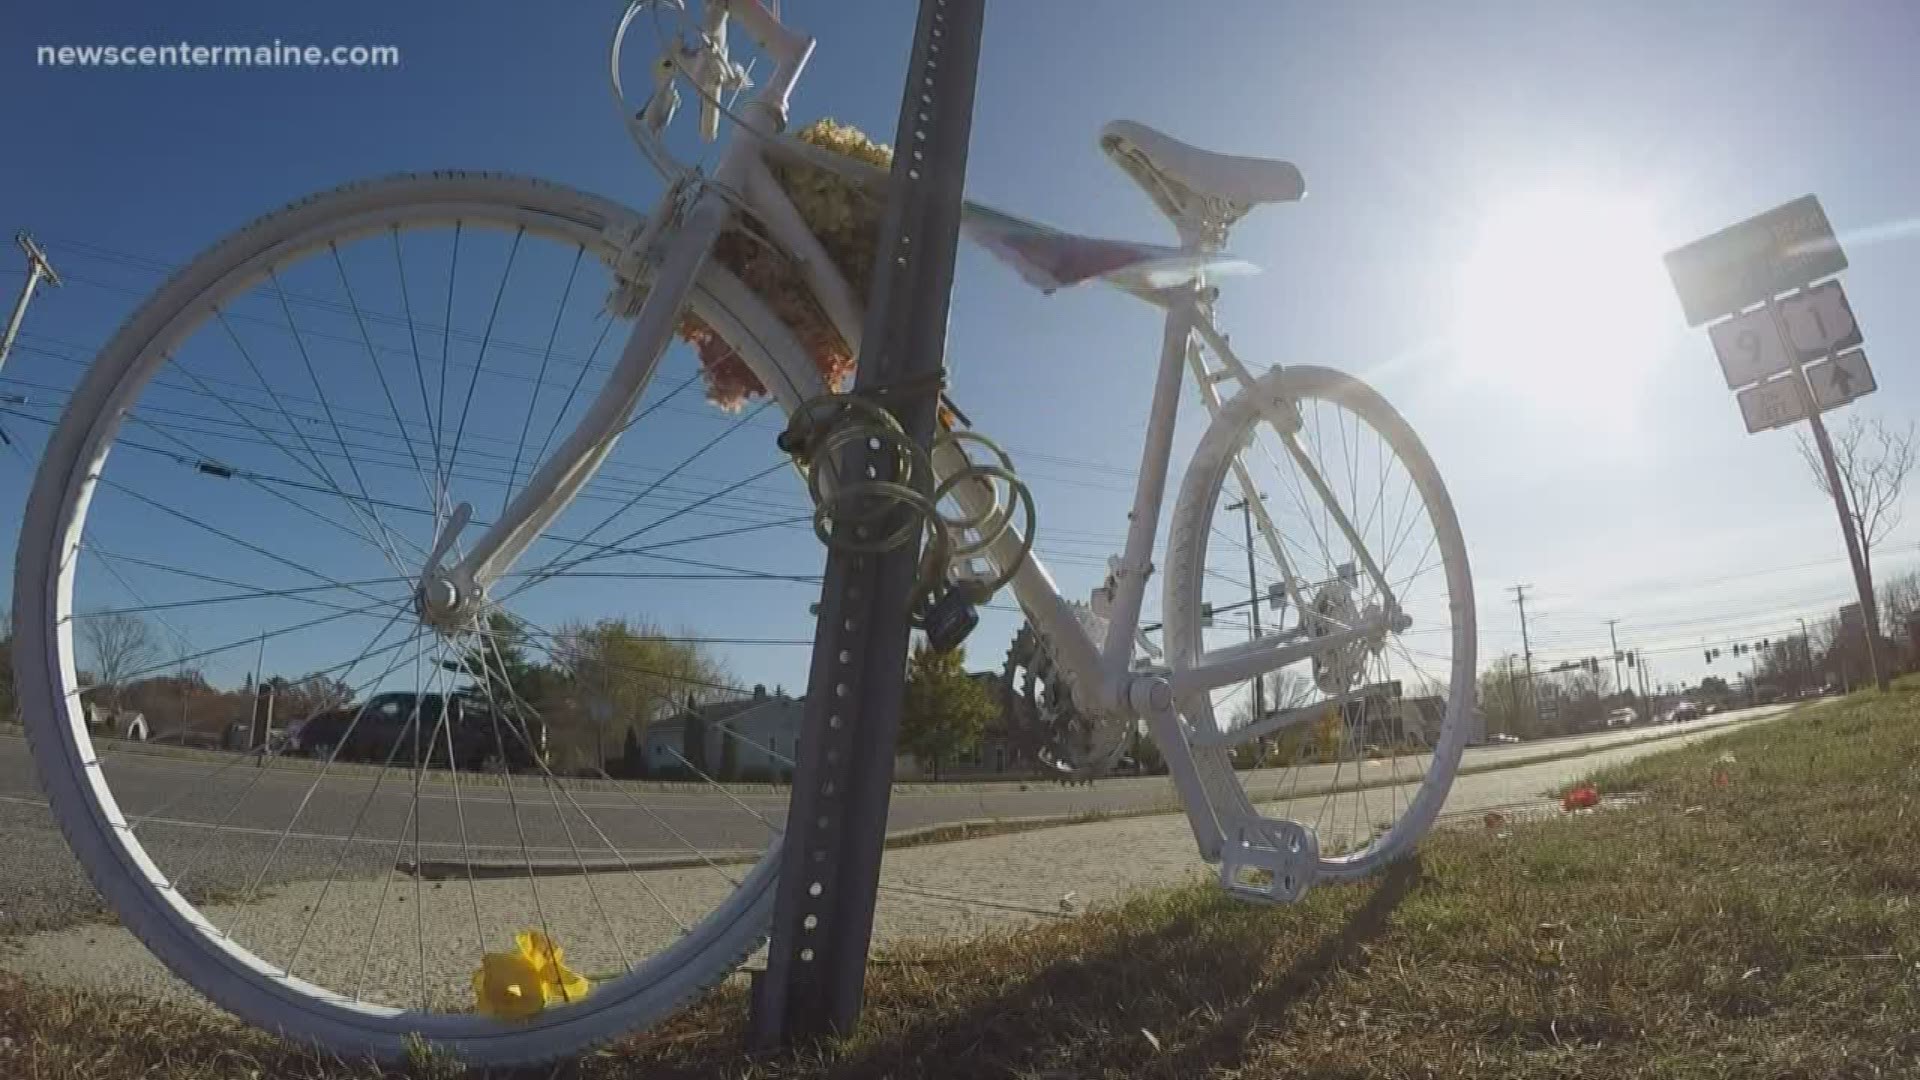 Family members try and honor the woman lost with a Ghost Bike roadside memorial